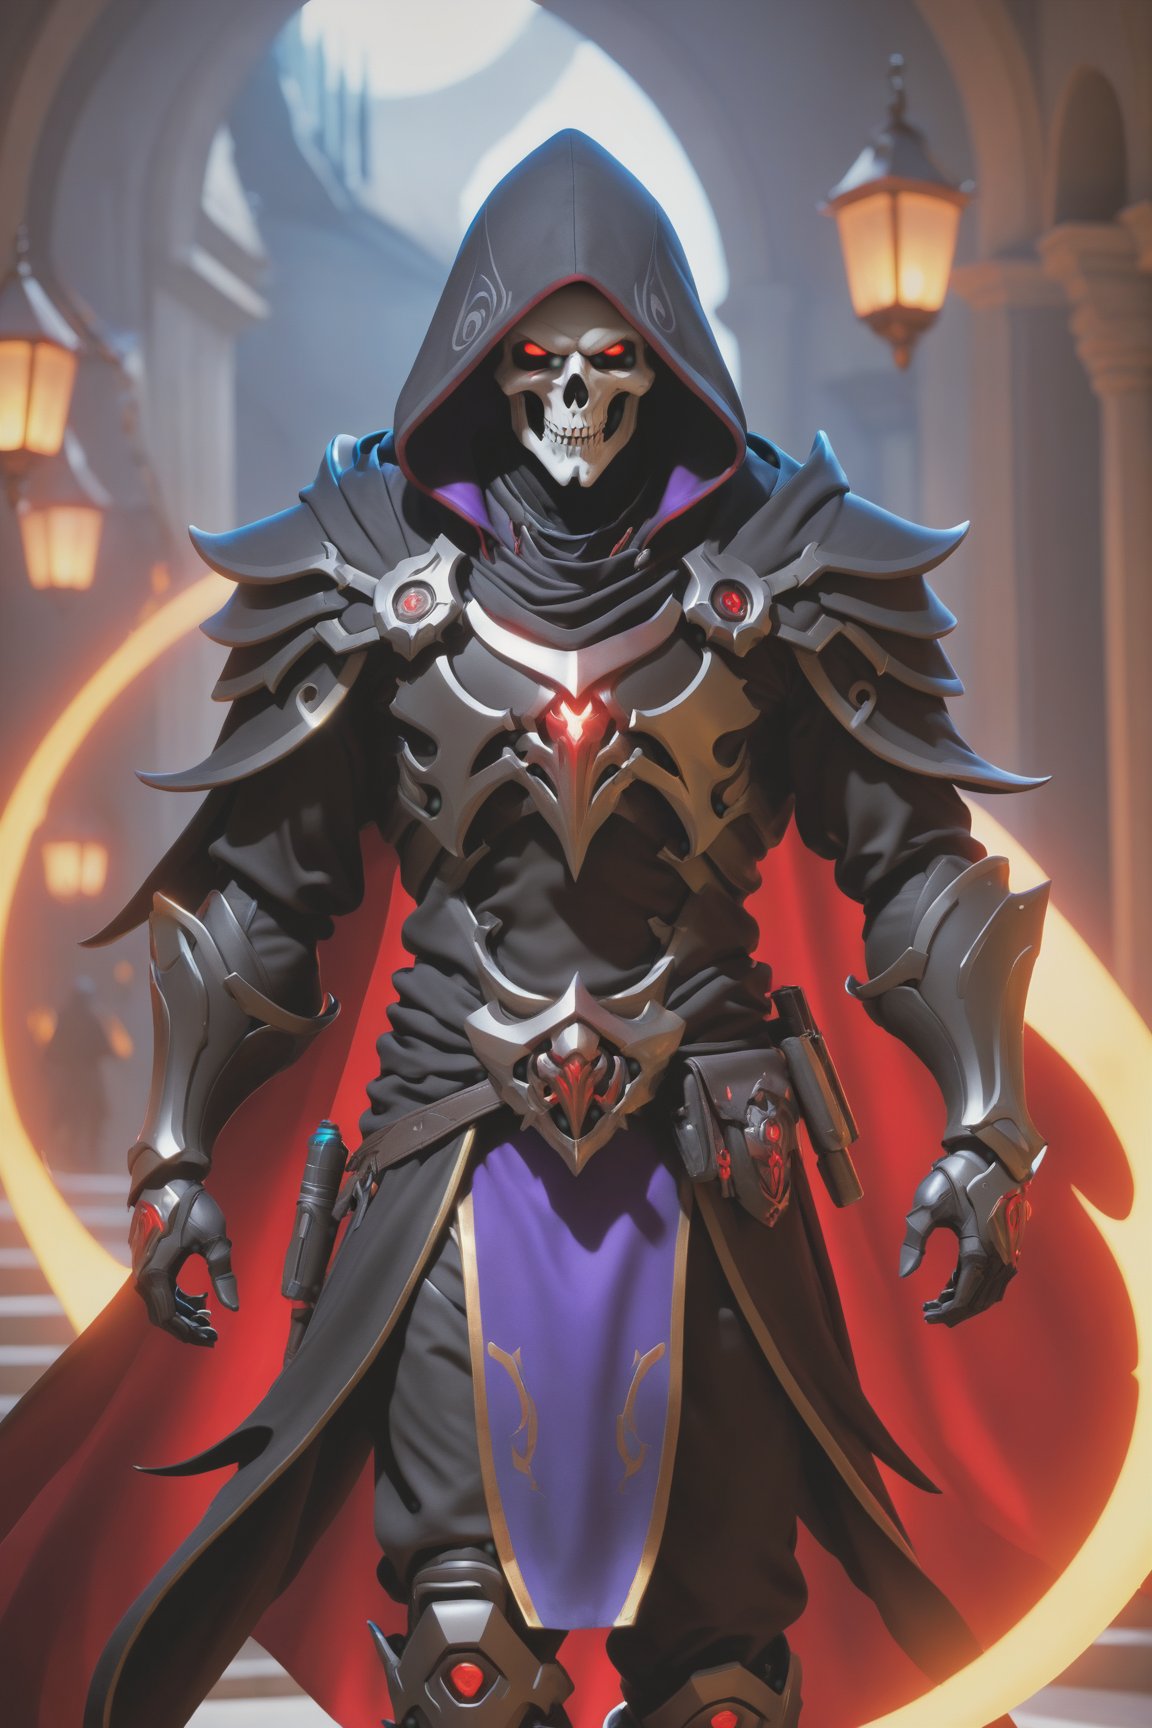 (best quality), (4K, HDR), ((Overwatch)), mage Reaper, musuclar man, hooded, strong body, glowing red eyes, death magic (Death shot), fantasy style armor and clothing, fantasy, vibrant colors, dark fantasy, dark